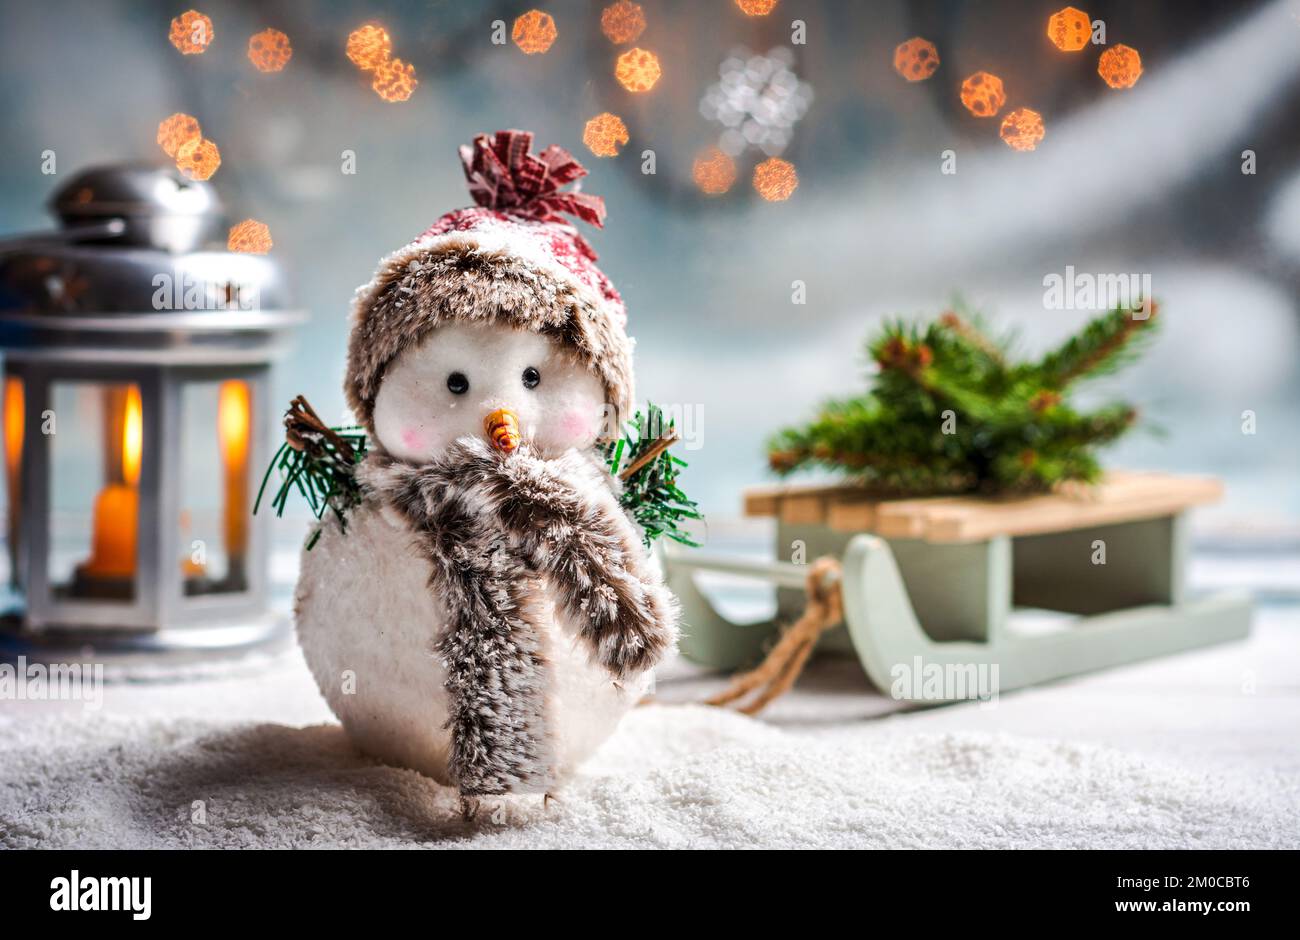 Toy snowman with festive illuminated Christmas holiday abstract background Stock Photo